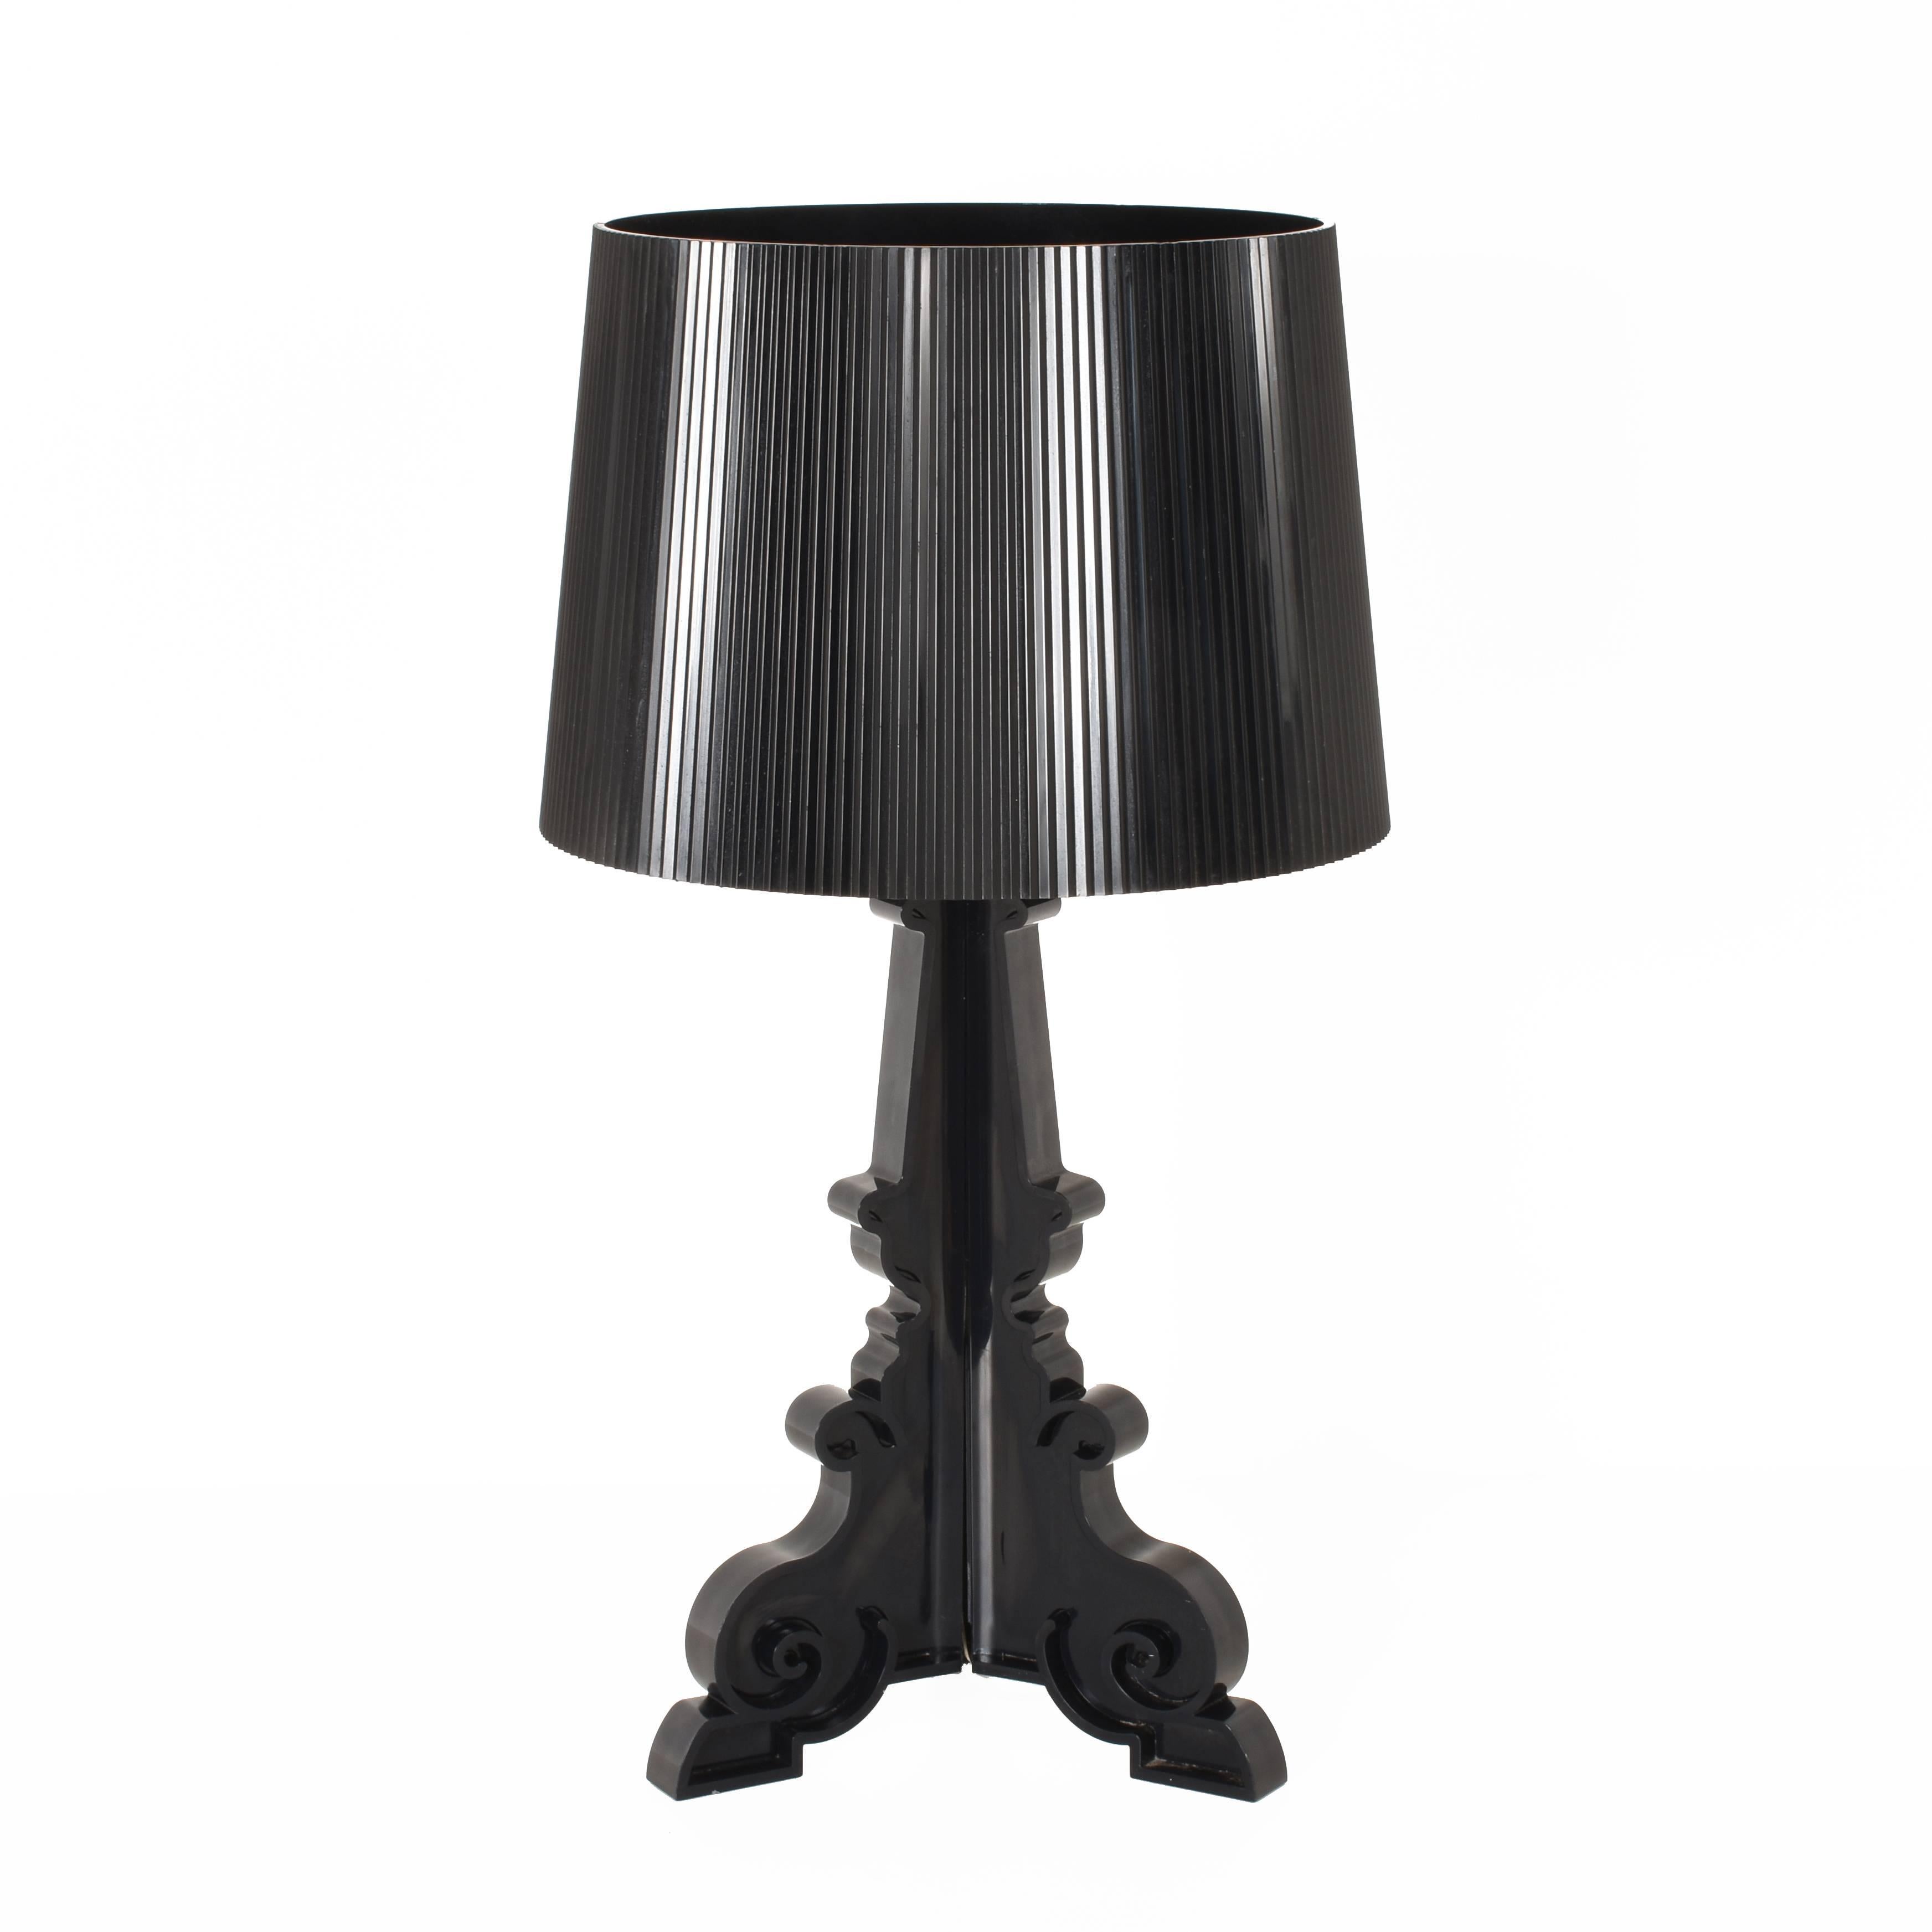 A lamp with an unmistakable style, a true best-seller by Kartell, Bourgie marvellously combines classicism, wealth and tradition with innovation and irony. The base, in Baroque style, consists of three decorated planes that intersect, while the